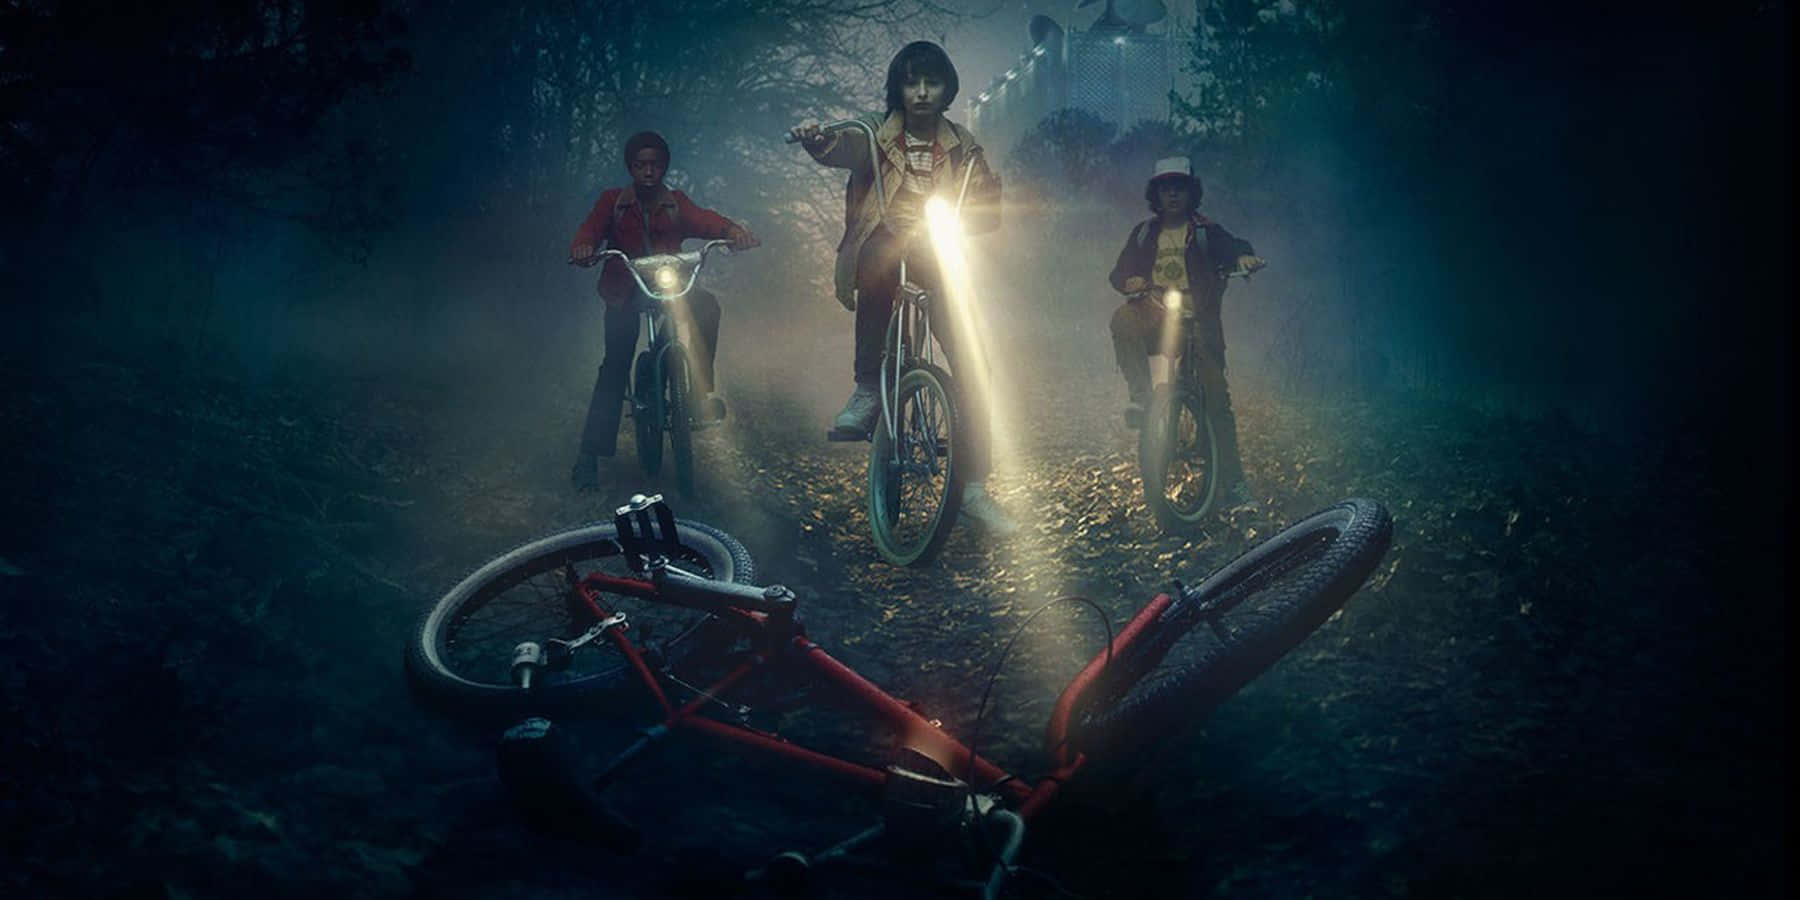 Riding into Adventure on the Stranger Things Bike Wallpaper